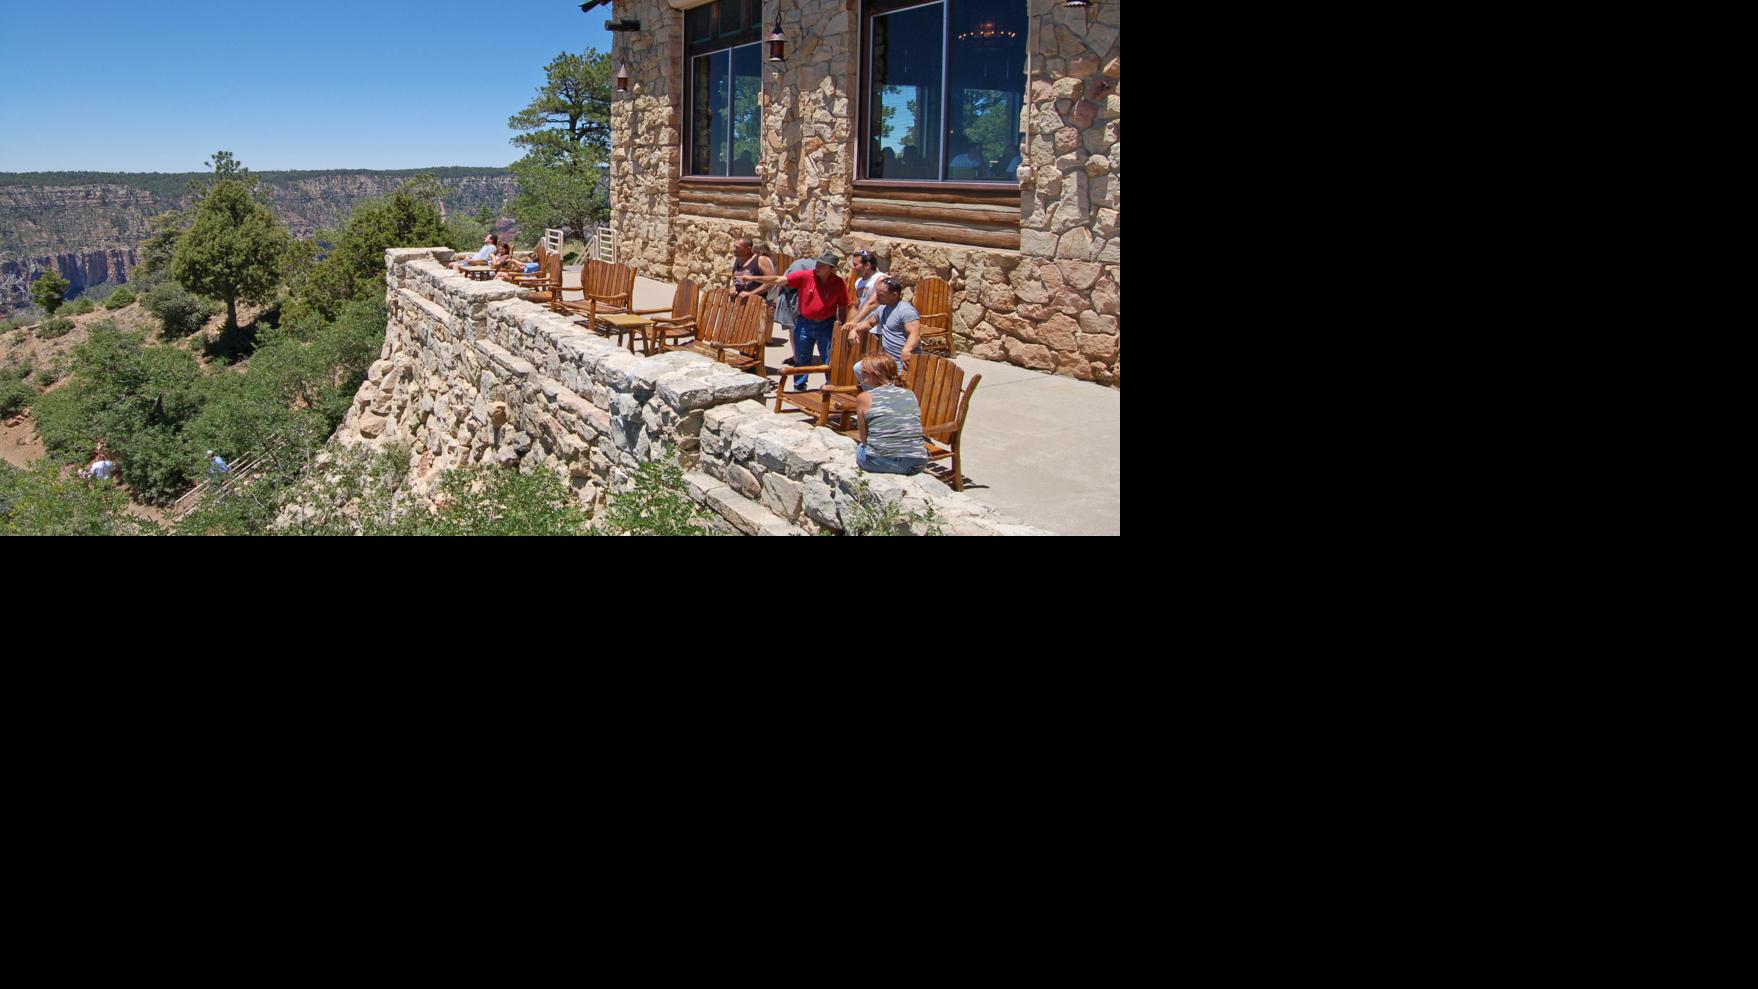 Grand Canyon North Rim to open May 15 Local